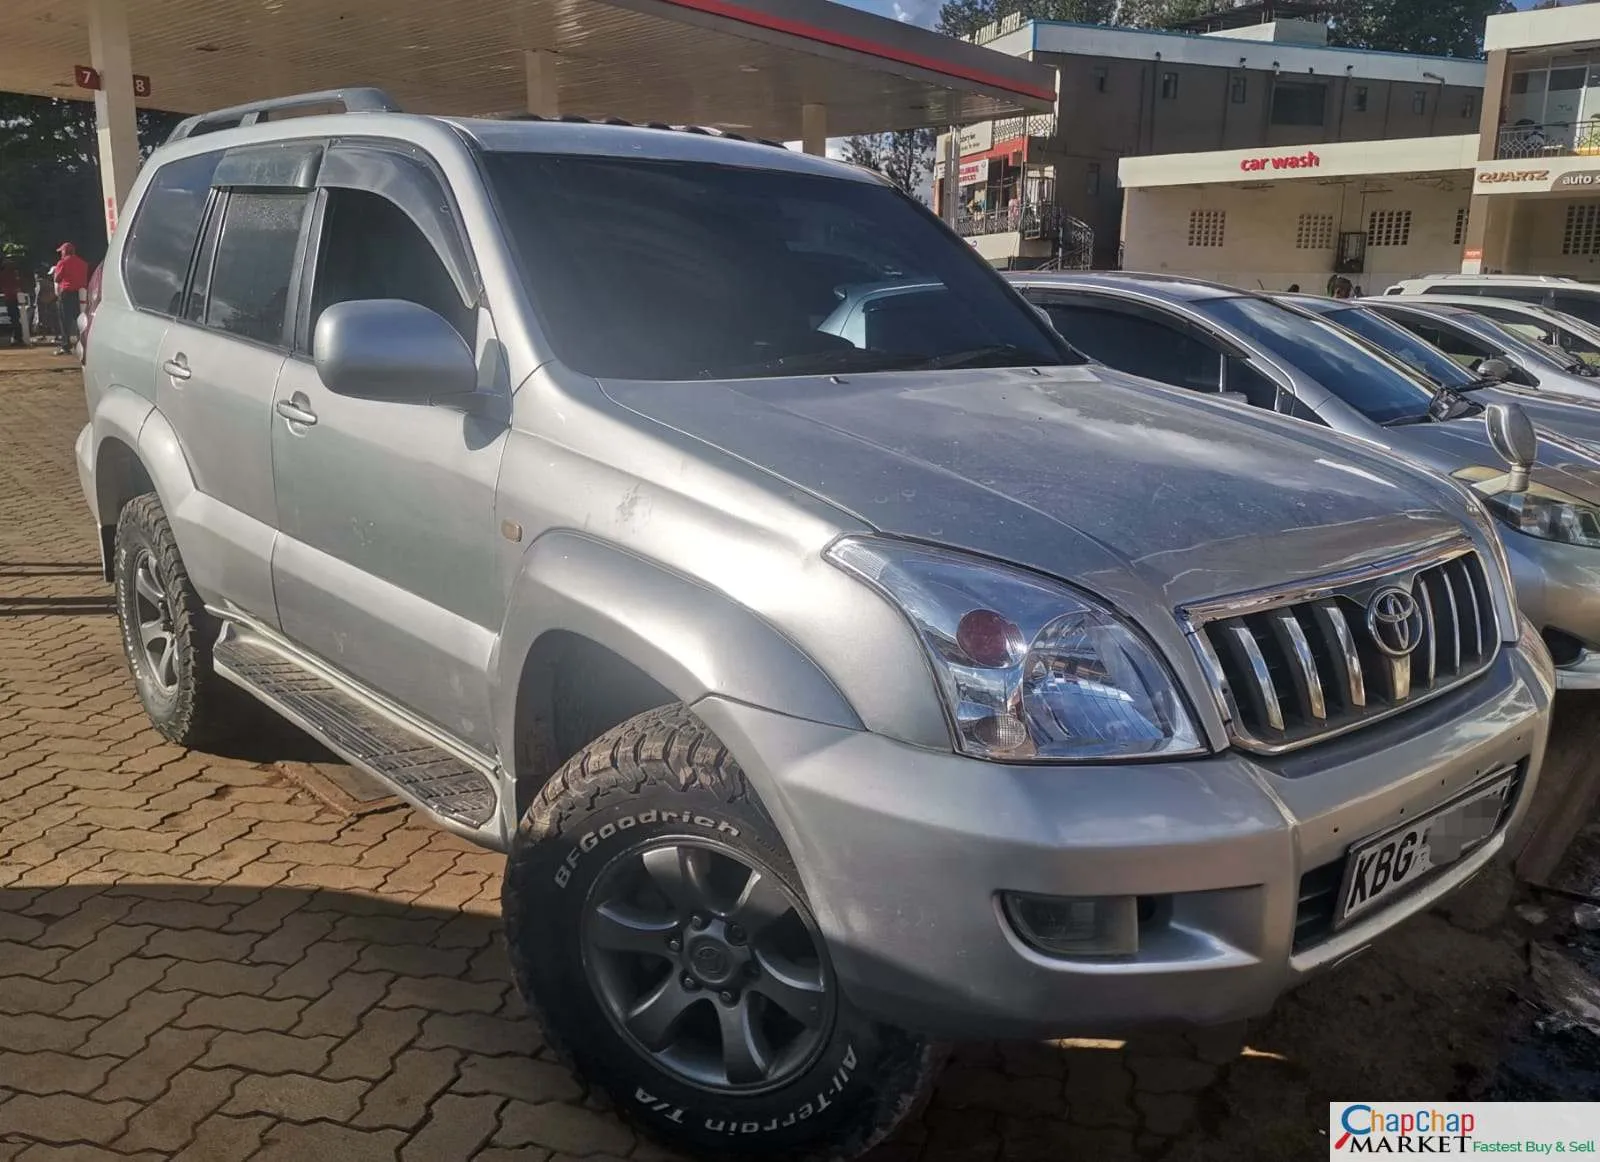 Cars Cars For Sale/Vehicles-Toyota Prado J120 with SUNROOF 1.39M You Pay 40% Deposit Trade in OK EXCLUSIVE 8